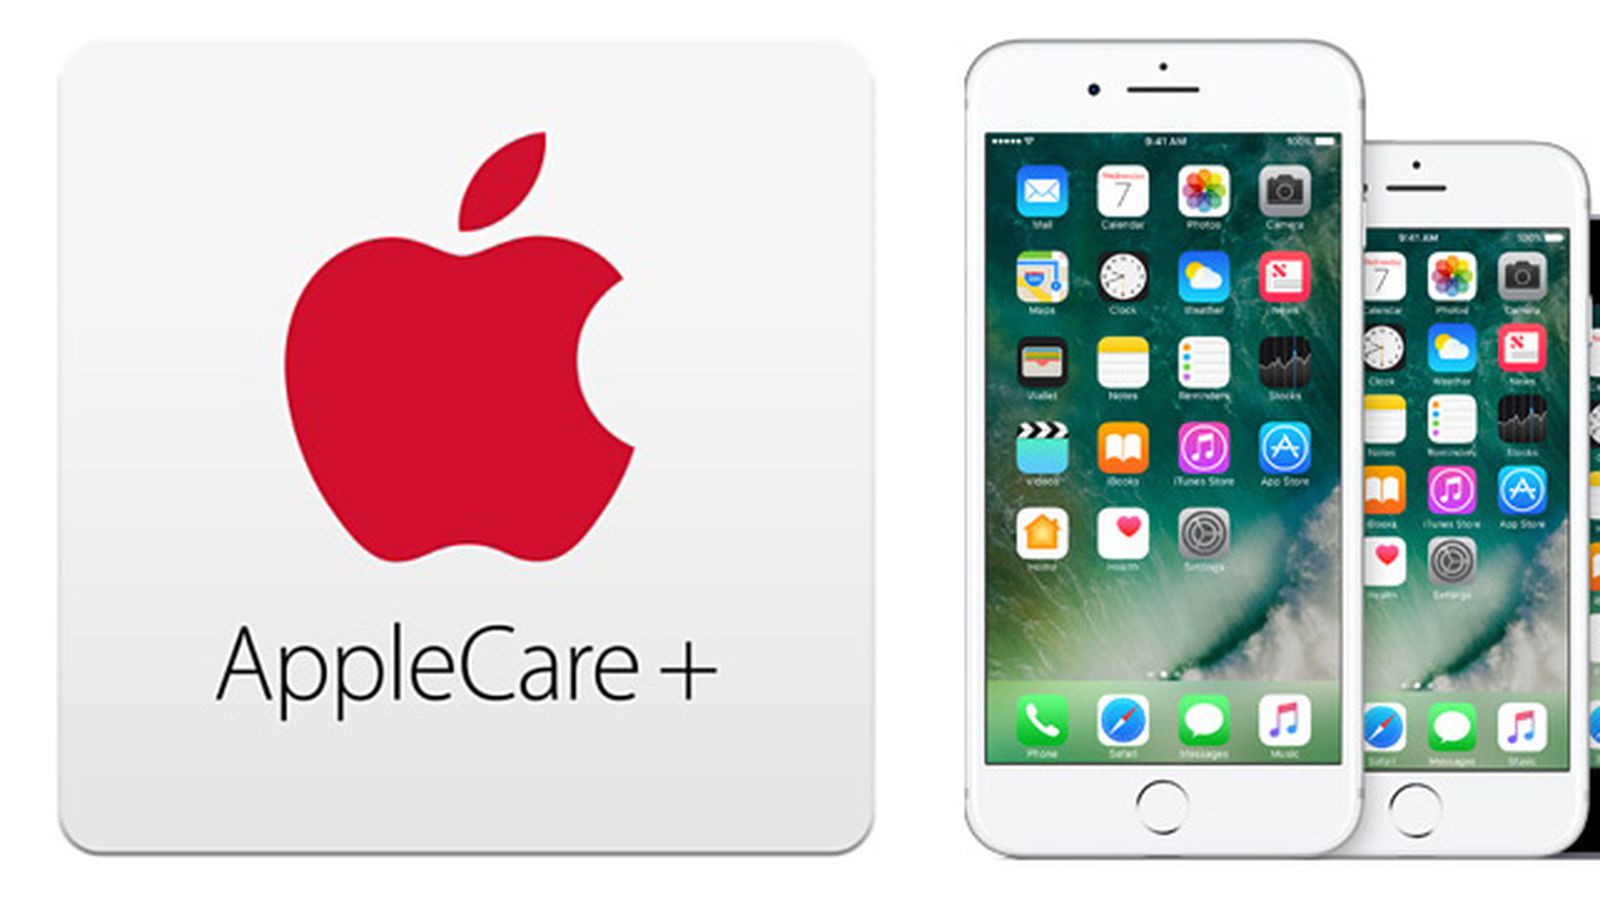 can i purchase applecare after purchase